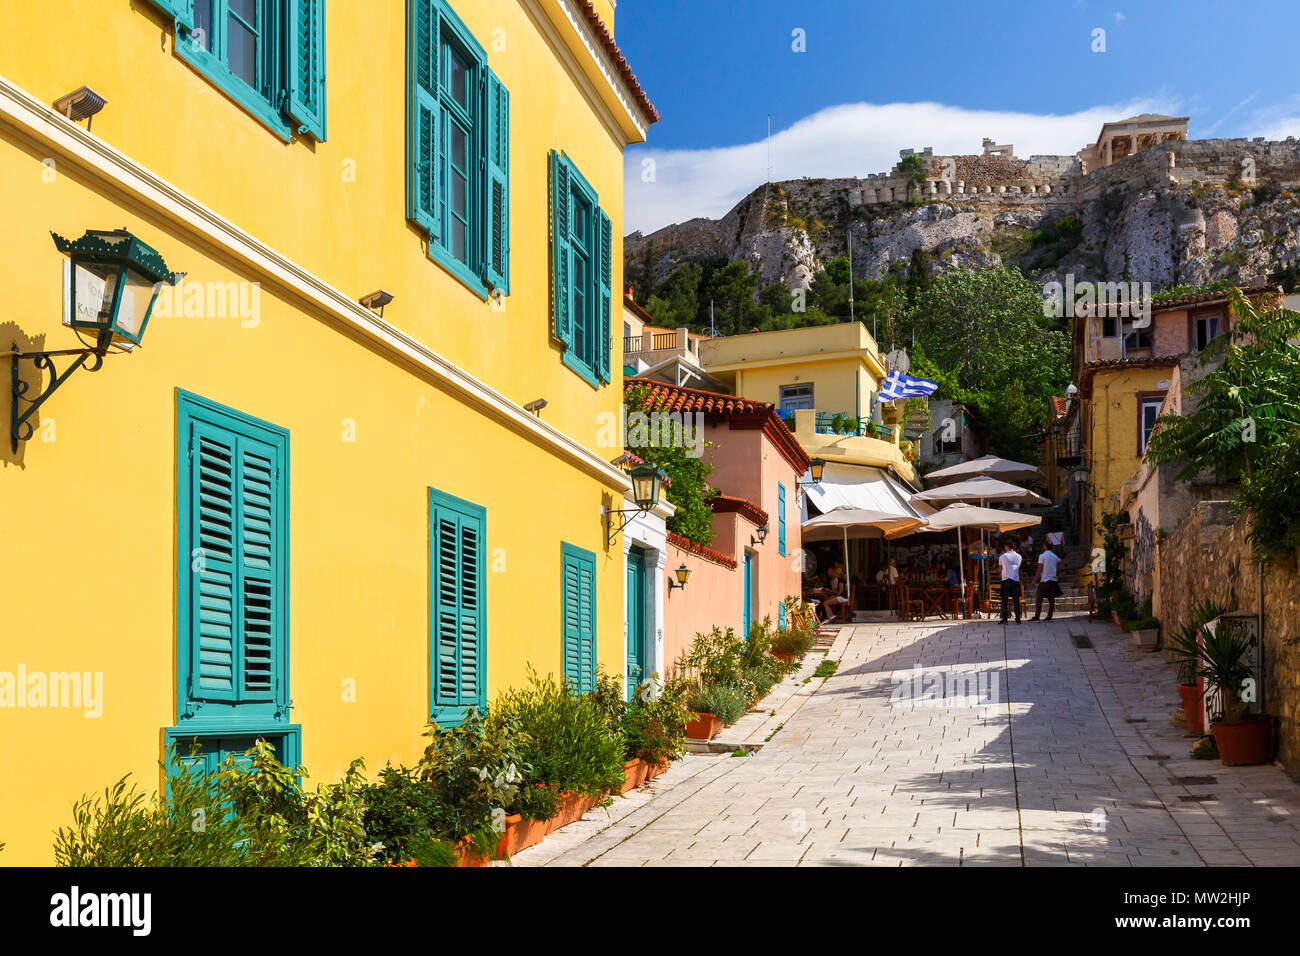 Athens, Greece - May 26, 2018: Neoclassical architecture in Plaka neighbourhood under Acropolis, Athens. Stock Photo